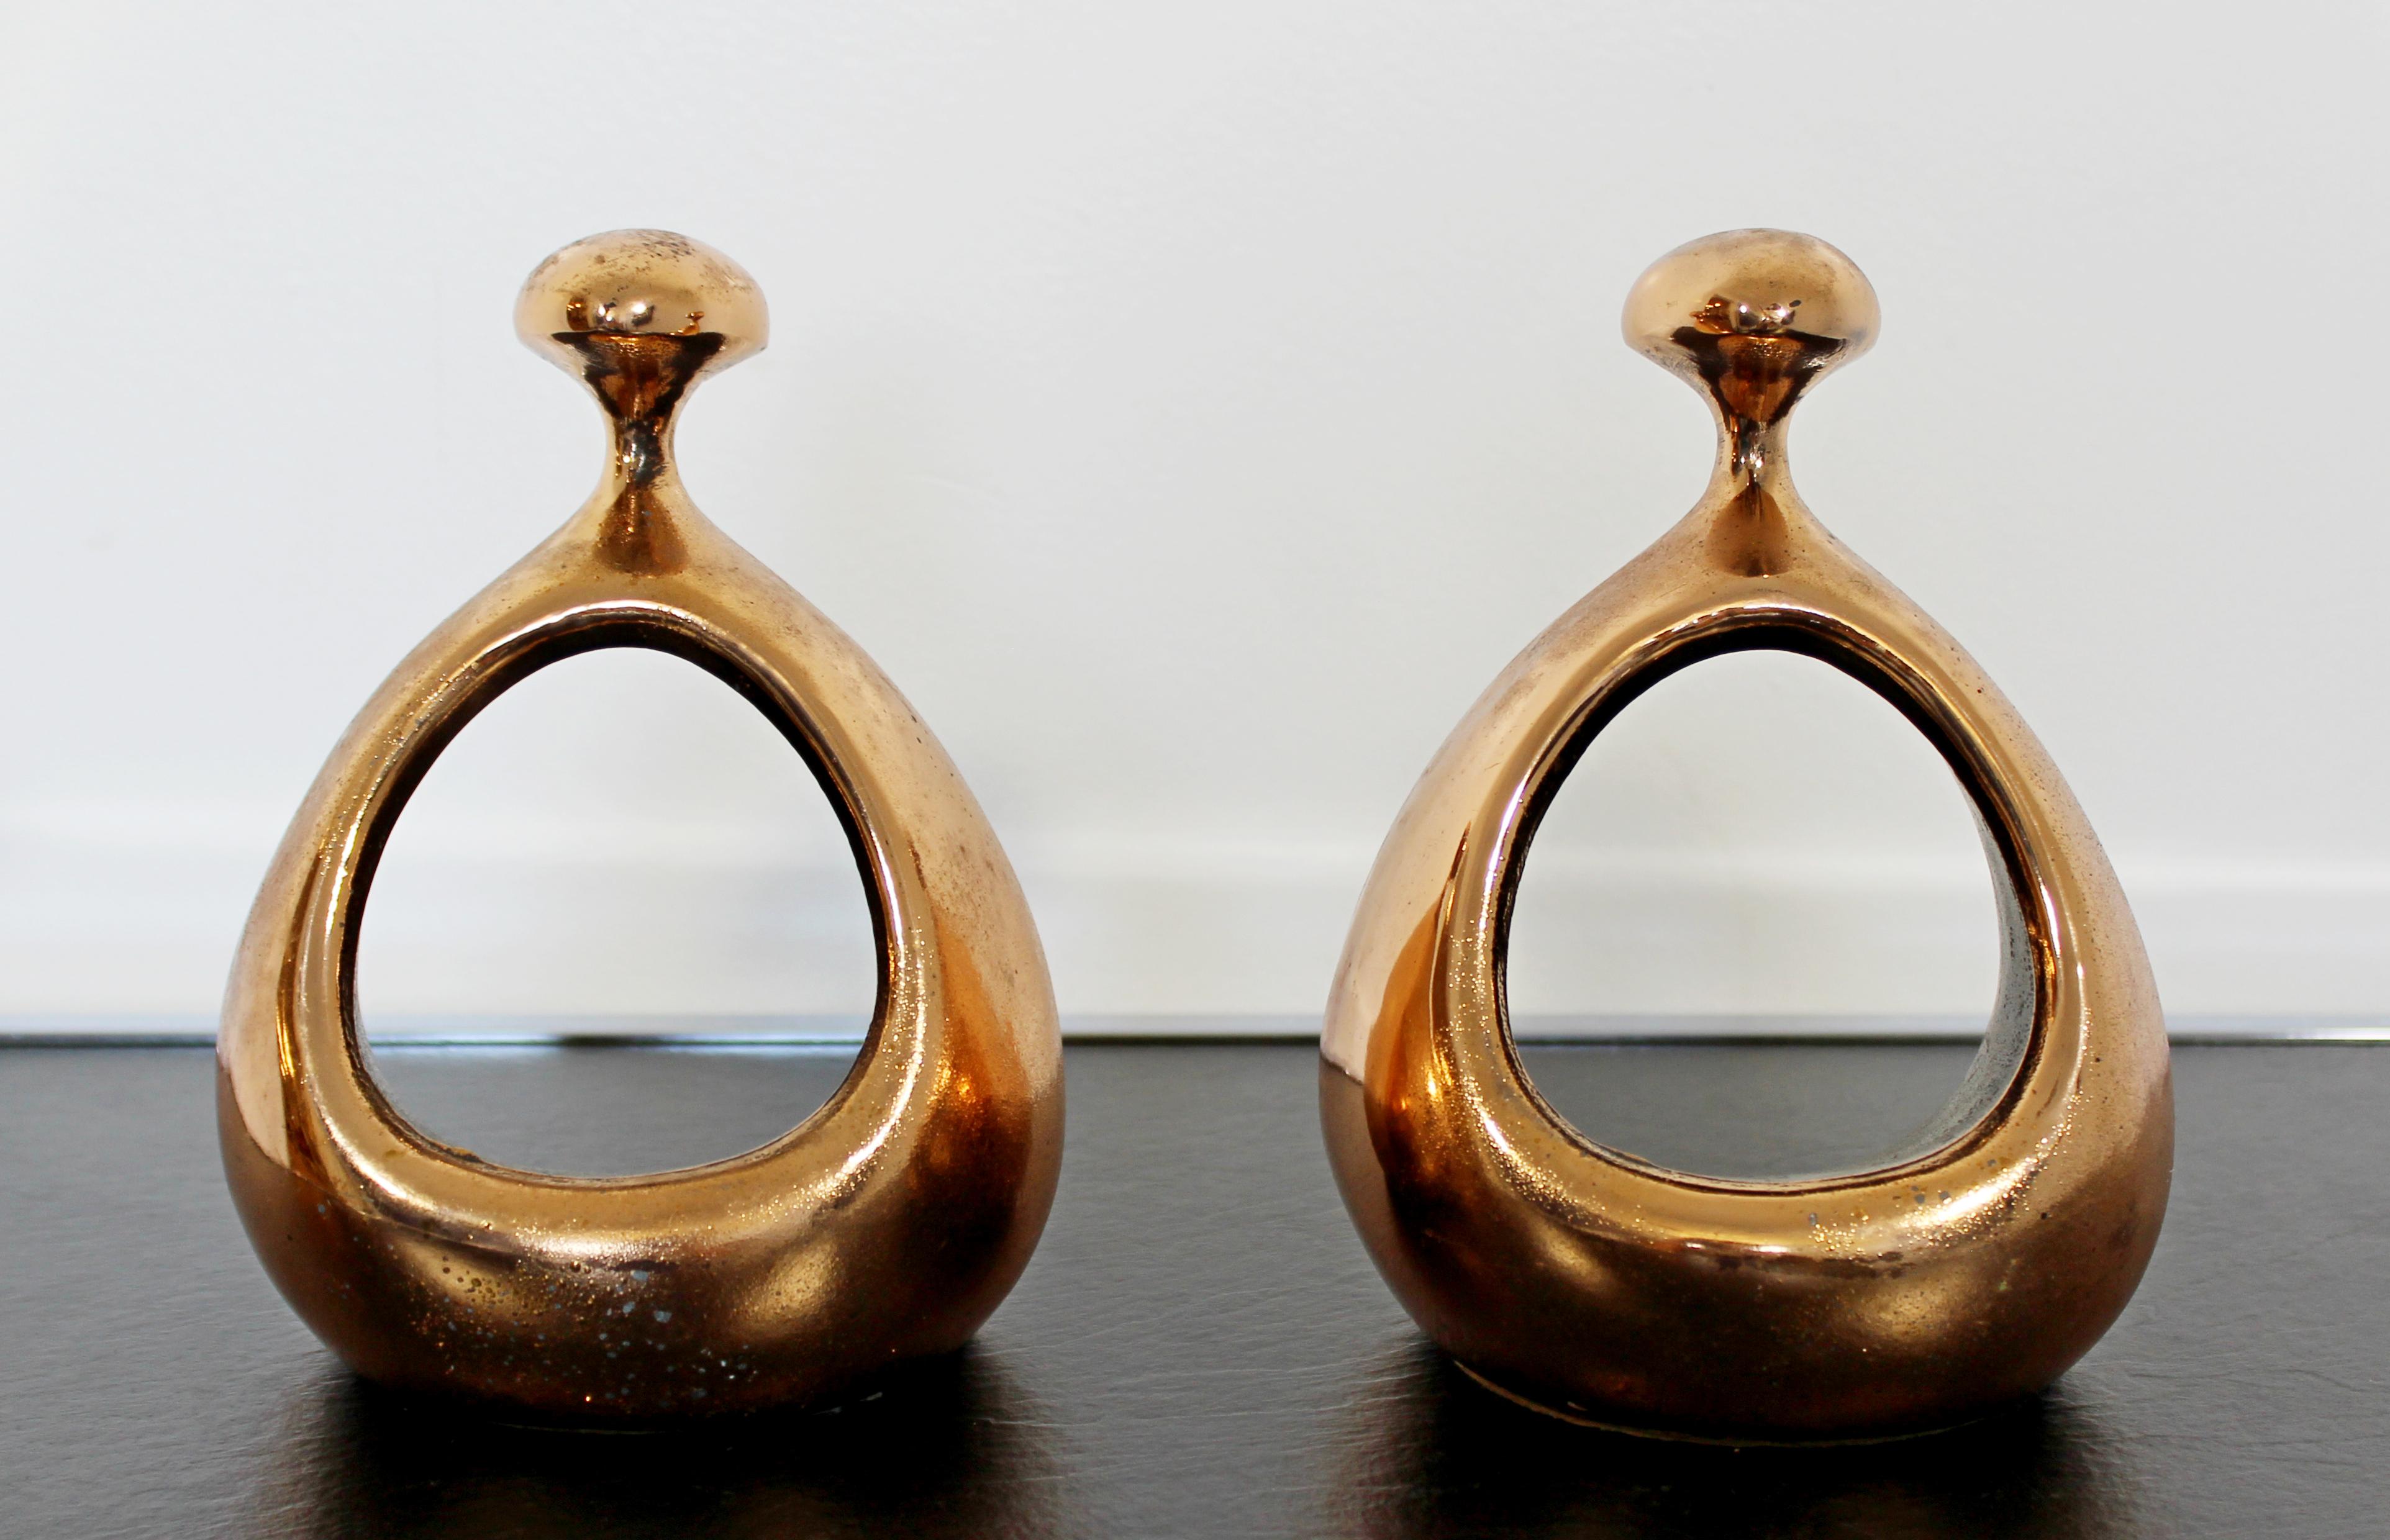 For your consideration is a wonderful pair of copper colored bookends, by Ben Siebel, circa 1950s. In very good vintage condition, with a patina to match the age. The dimensions of each are 5